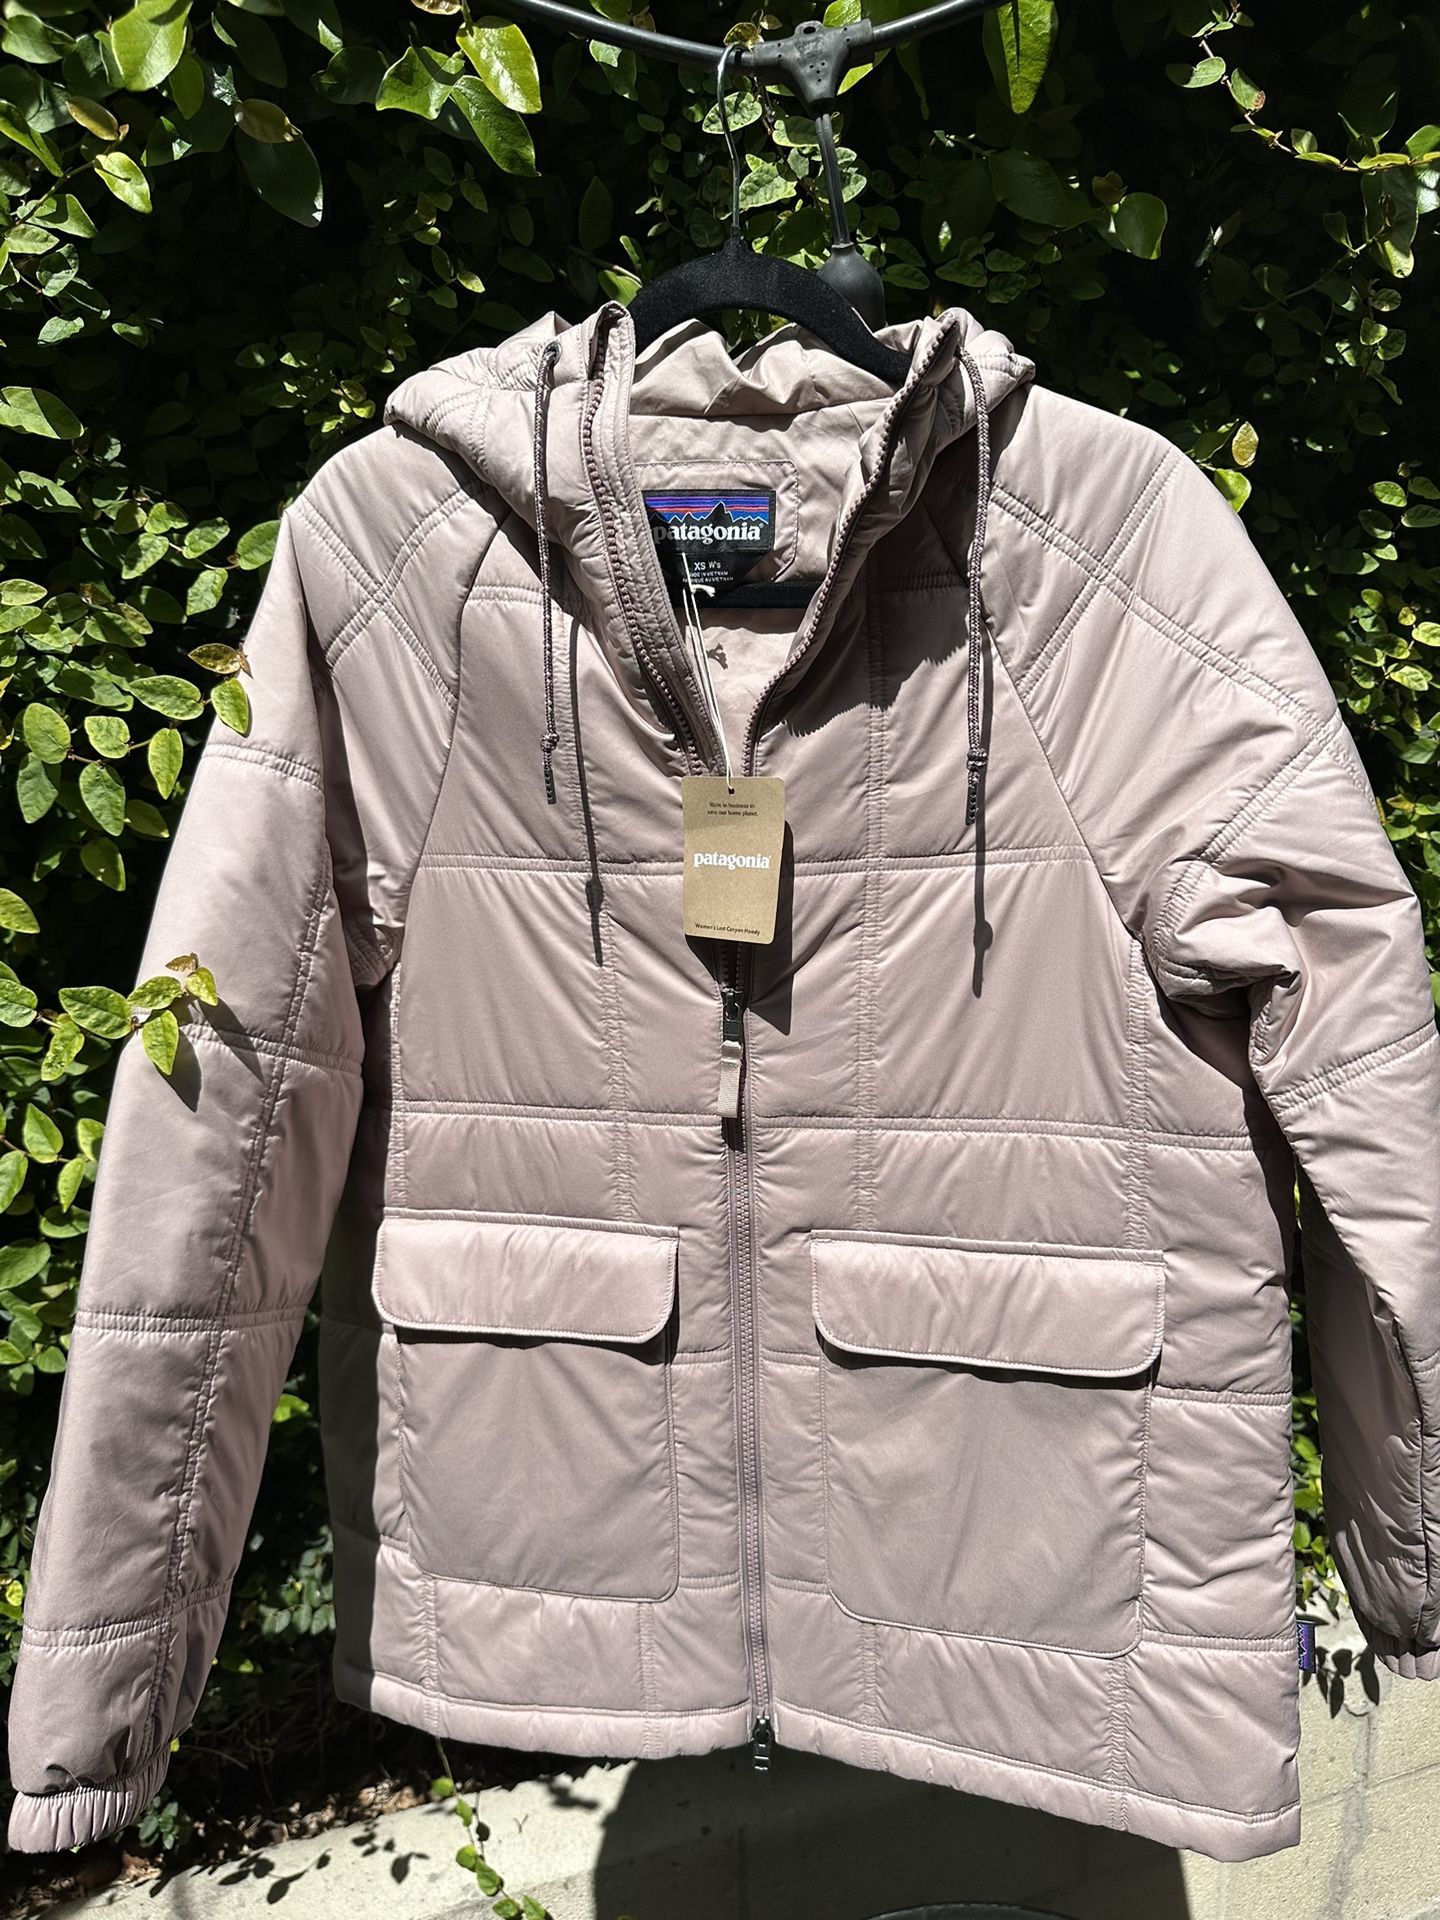 NEW: Women’s Patagonia Lost Canyon Jacket XS